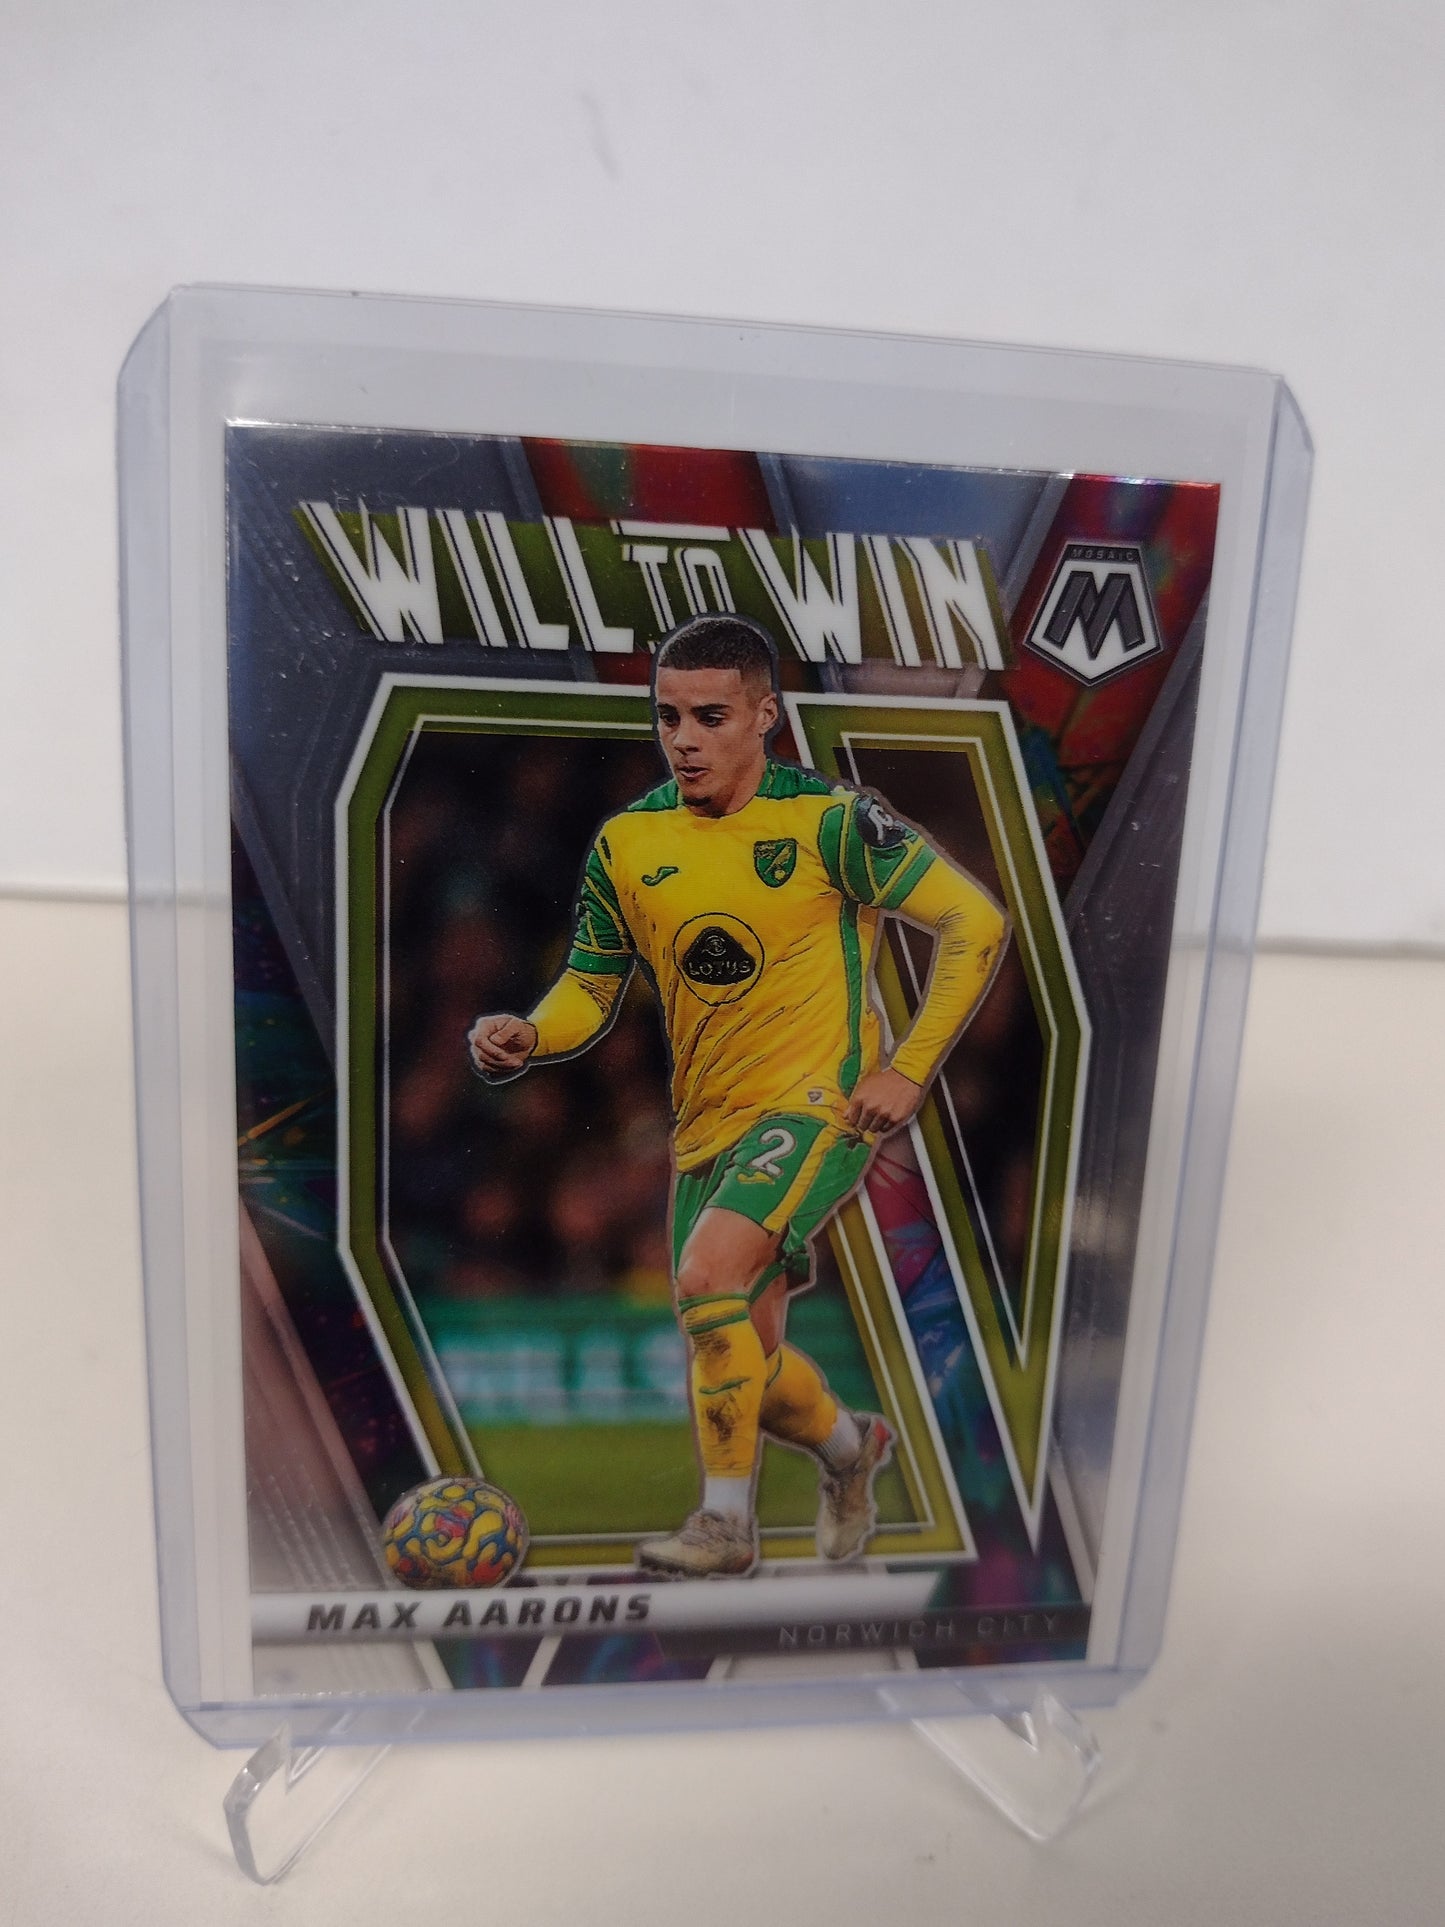 Max Aarons Will To Win Norich City Panini Mosaic Silver Prizm Premier League 2021-22